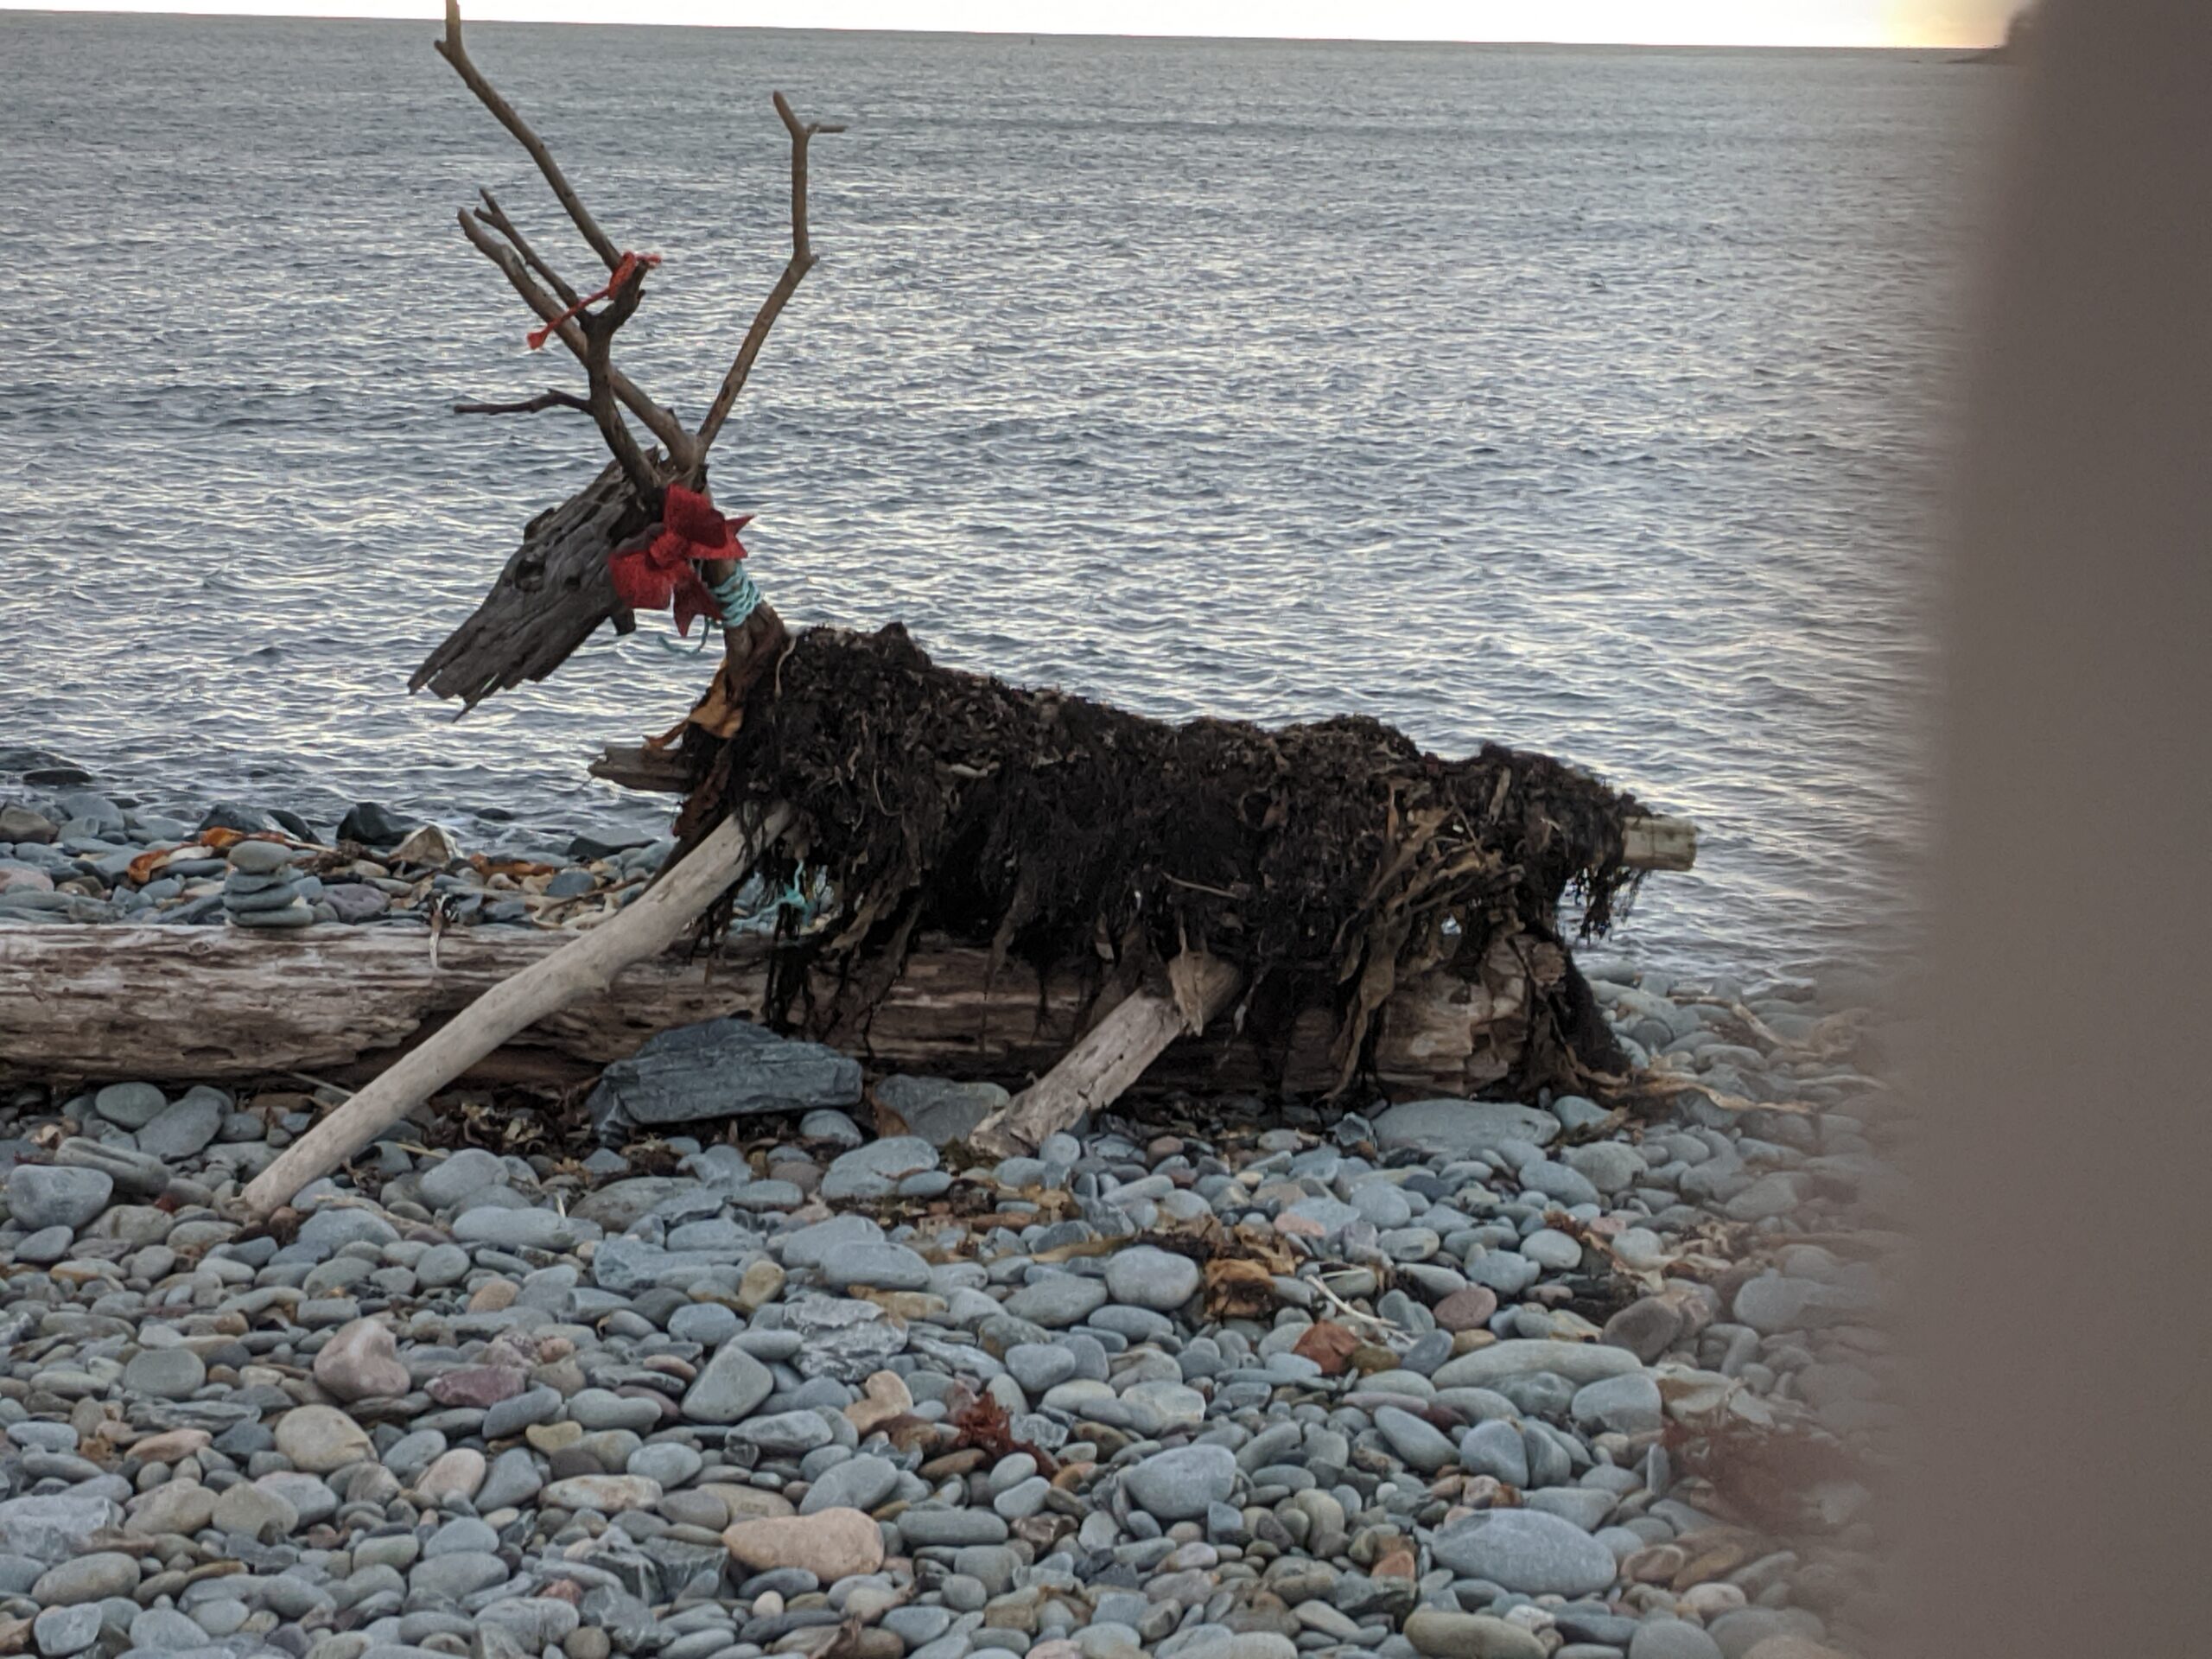 Like this driftwood reindeer off the boardwalk at Fishermen's Cove